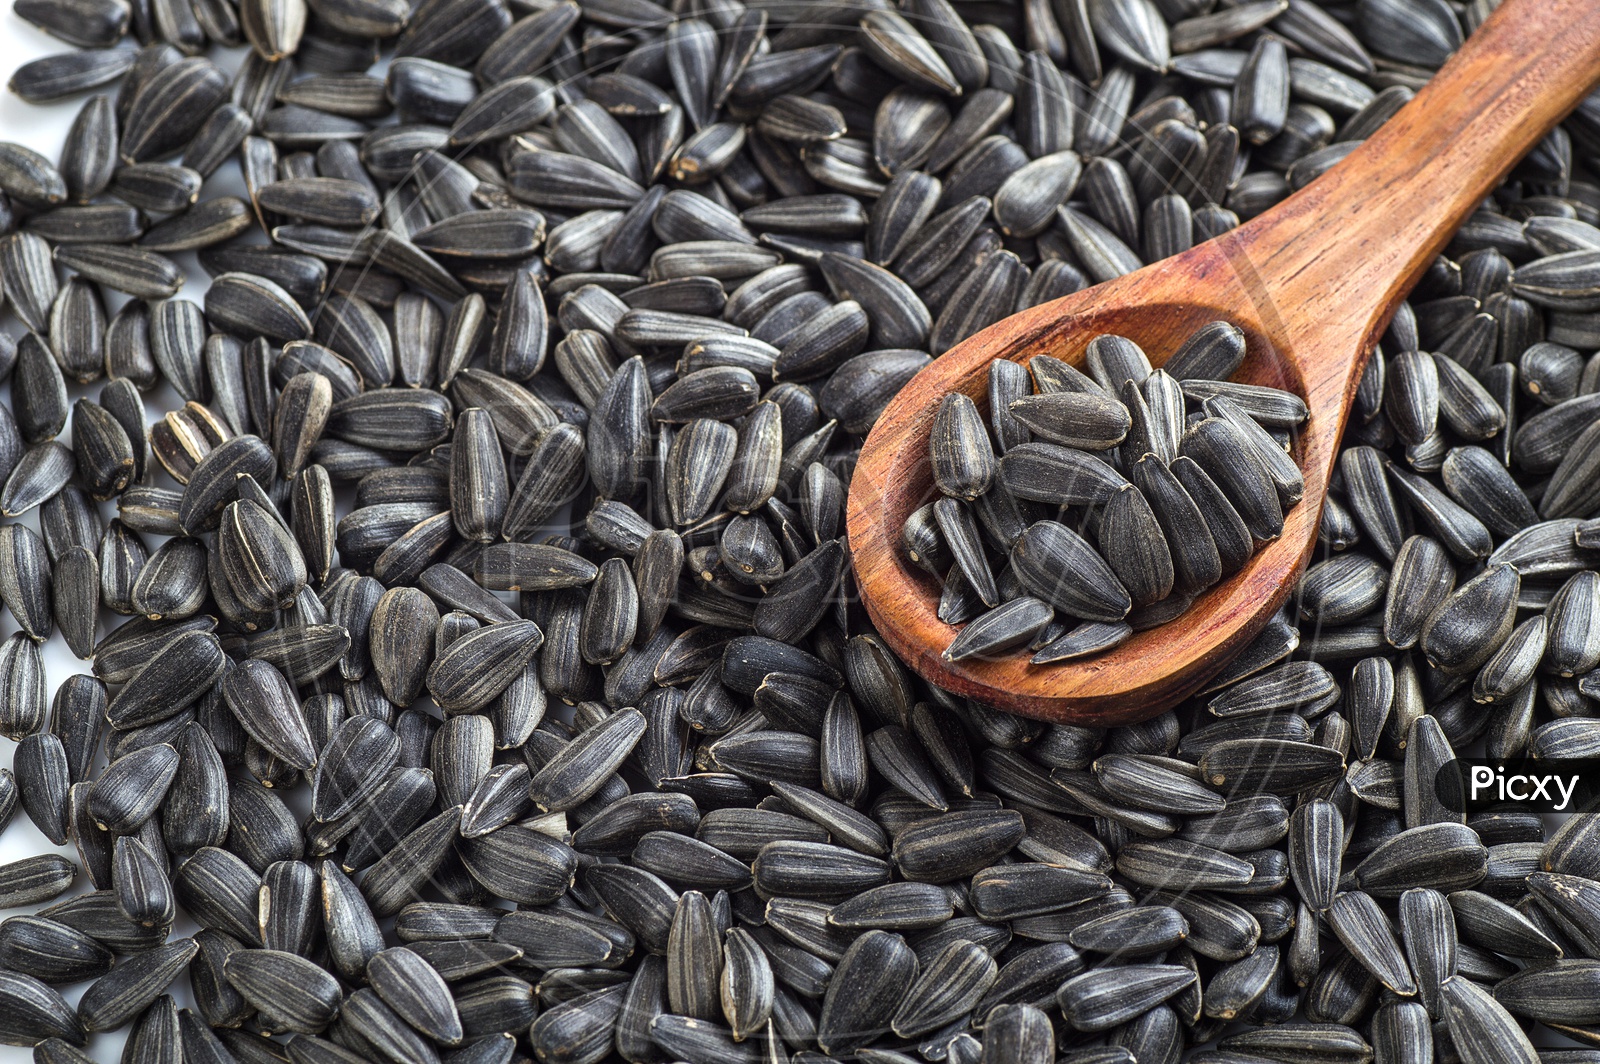 Sunflower seeds and a wooden spoon